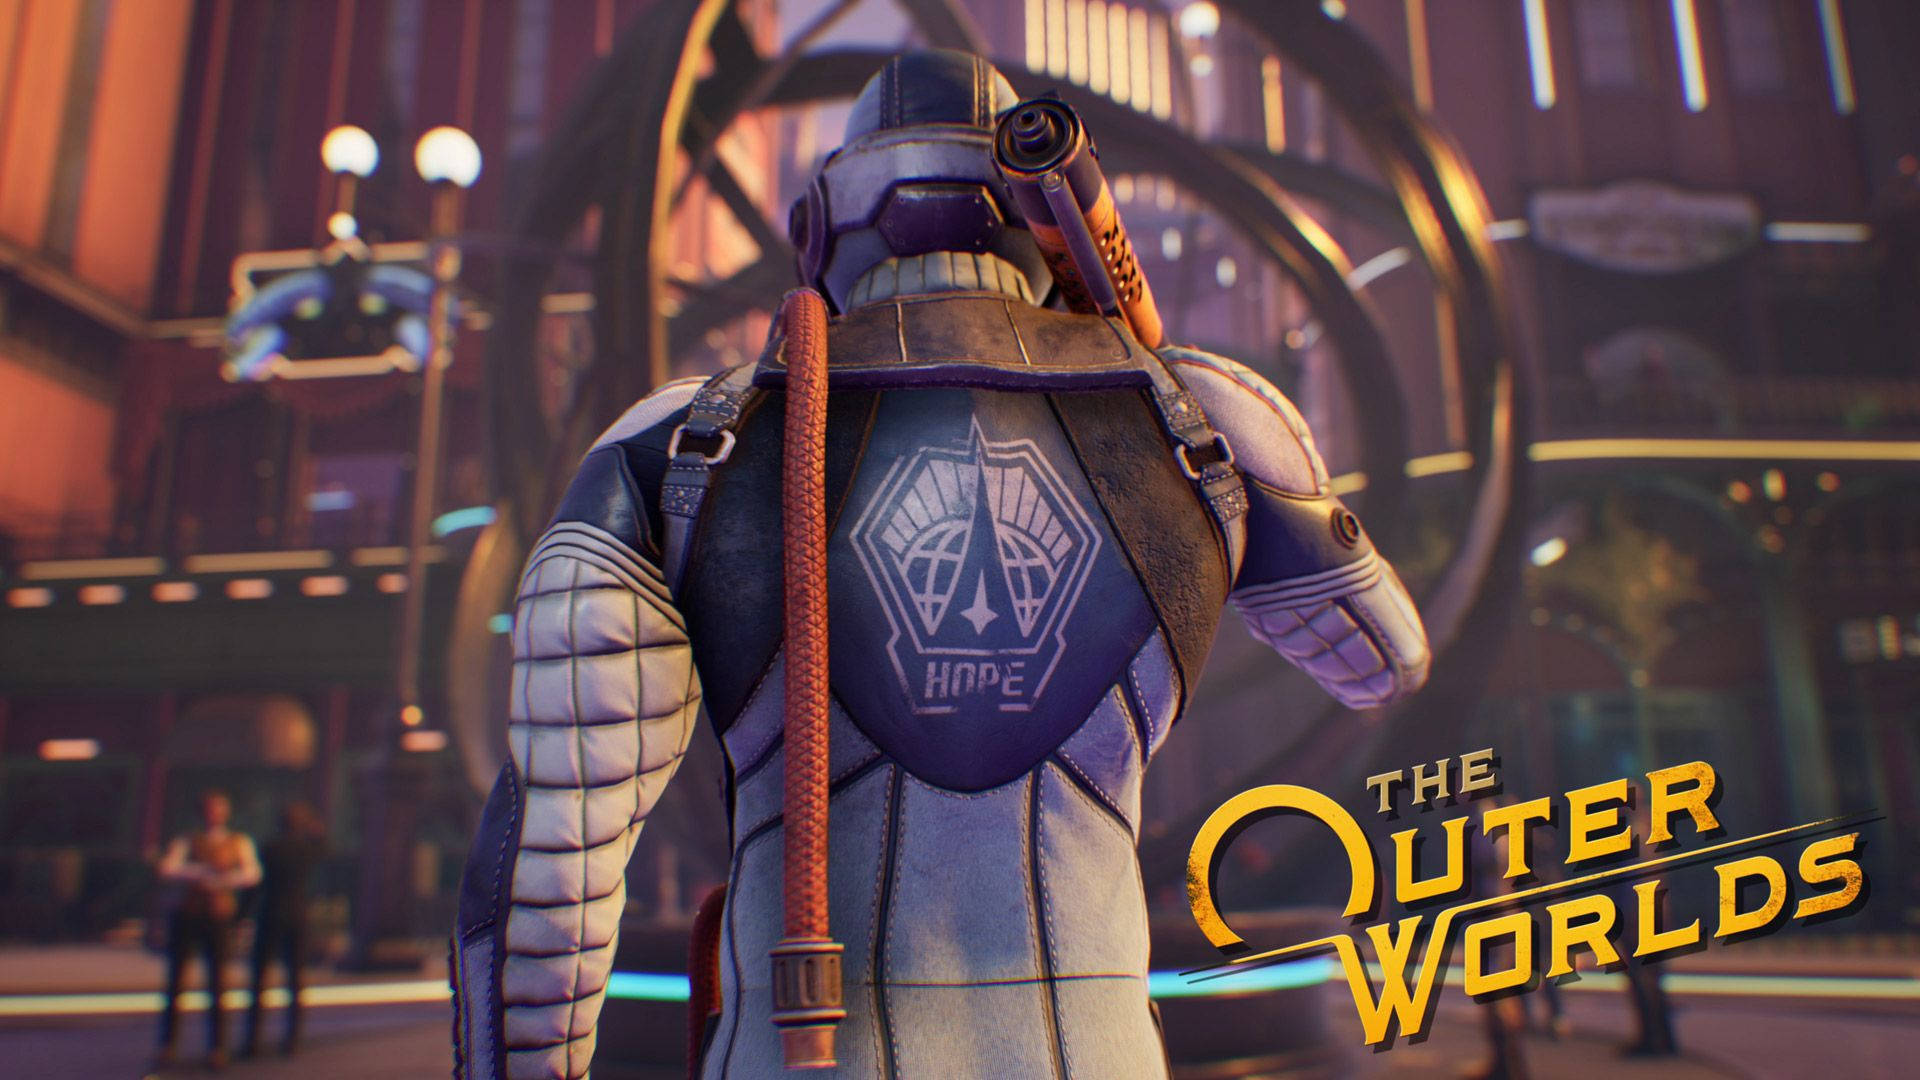 The Outer Worlds The Hope Wallpaper